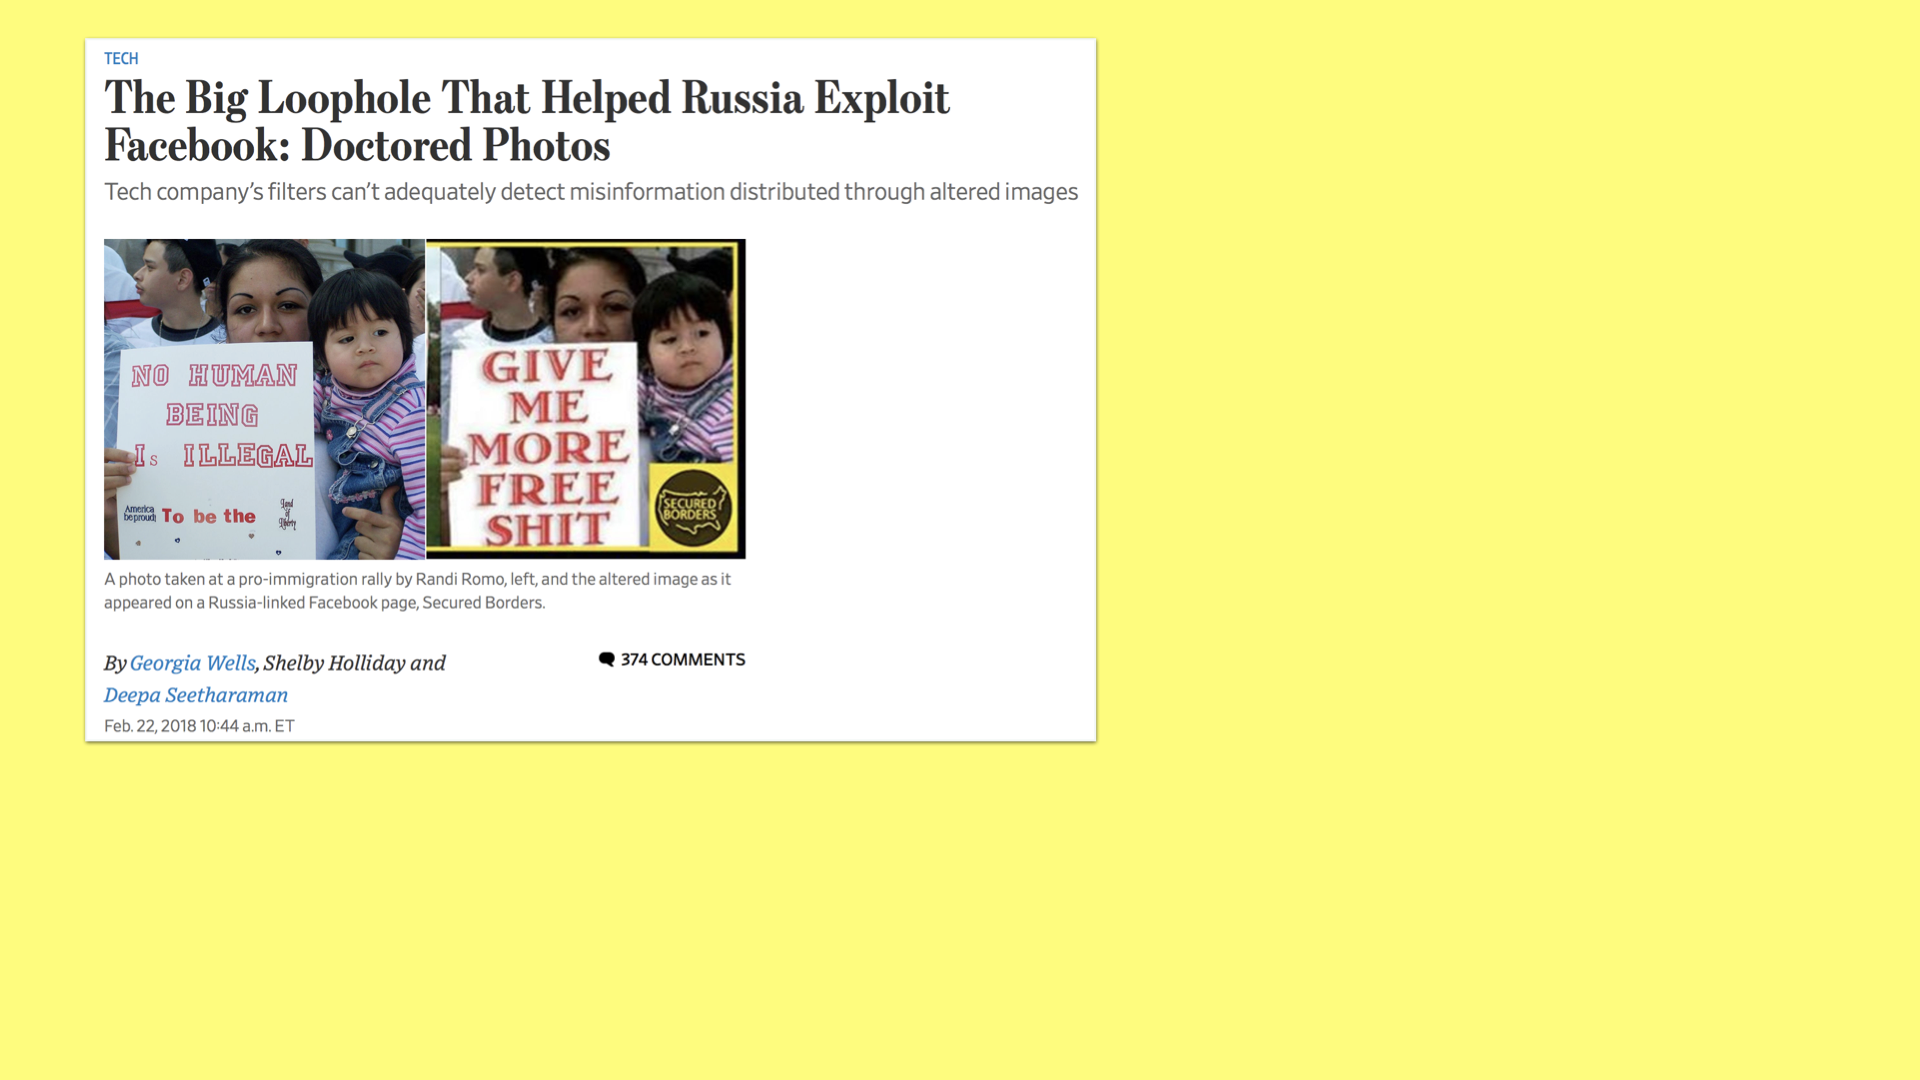 Headline: The Big Loophole That Helped Russia Exploit Facebook: Doctored Photos